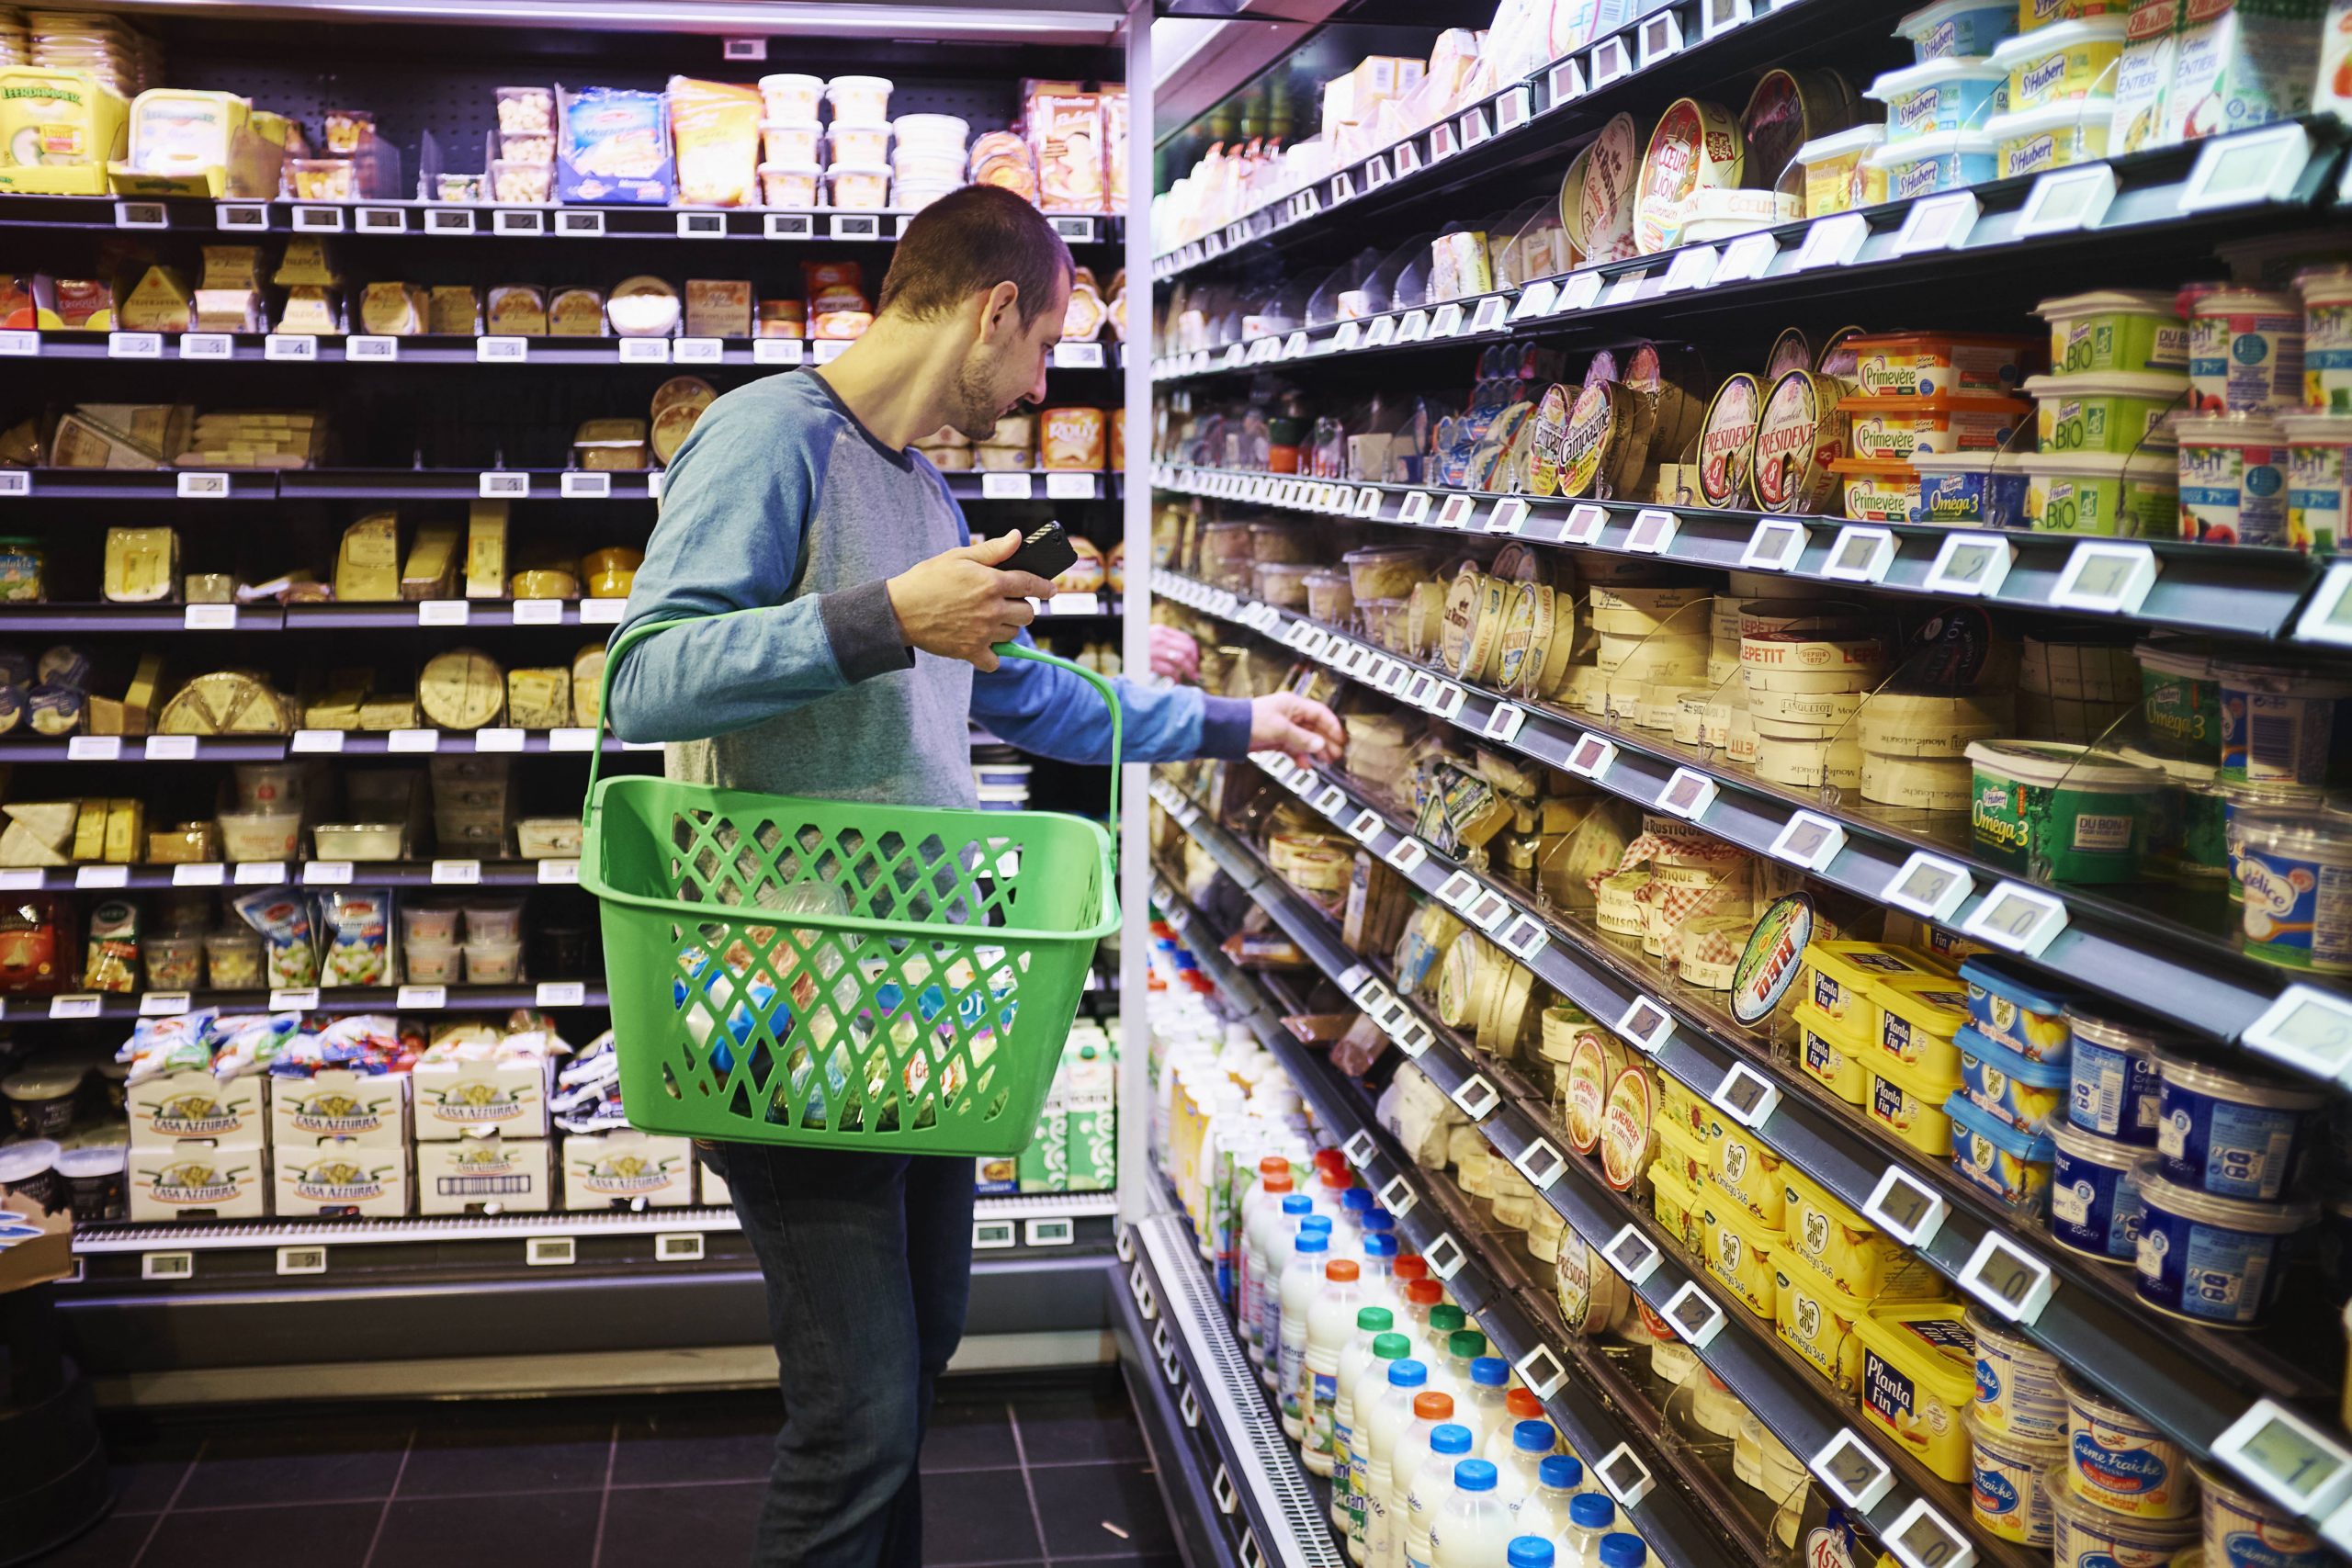 Consumer group in Spain says supermarkets are not lowering tax on some basic foods